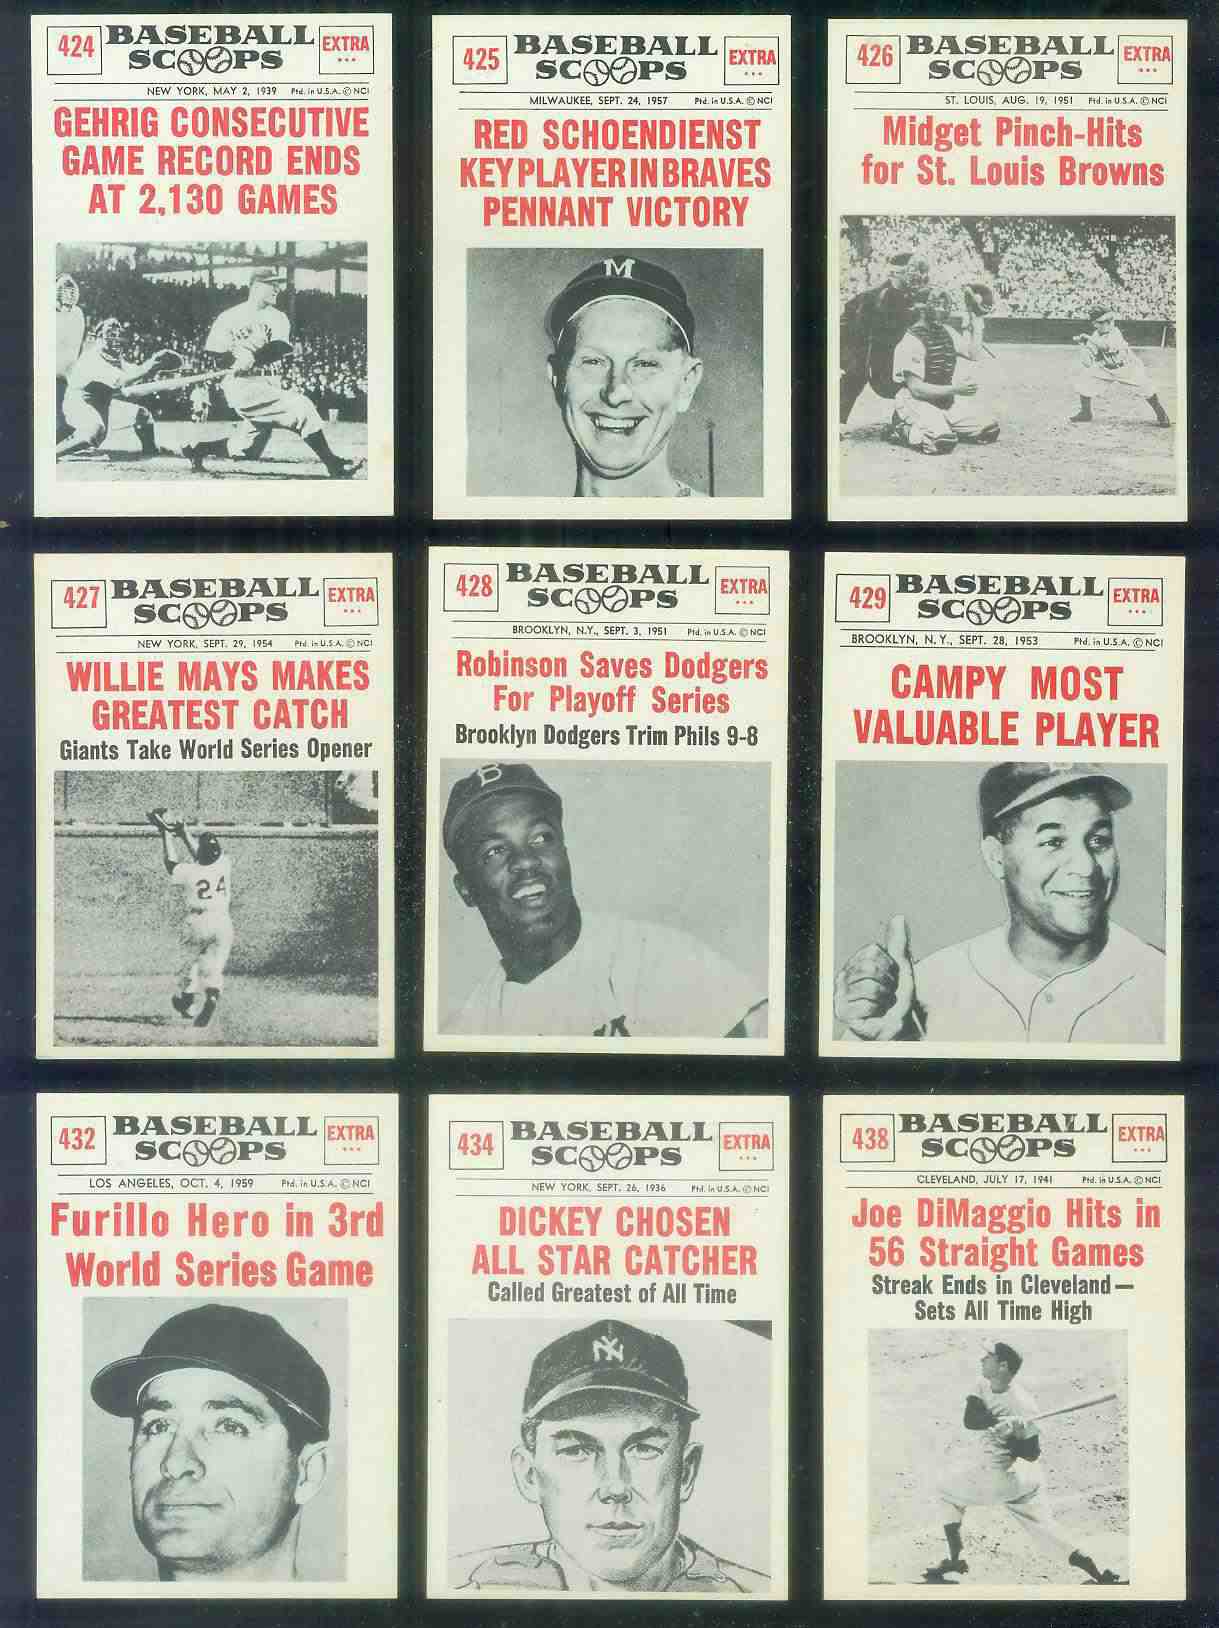 1961 Nu-Card Scoops #438 Joe DiMaggio 'Hits in 56 Straight Games' (Yankees) Baseball cards value